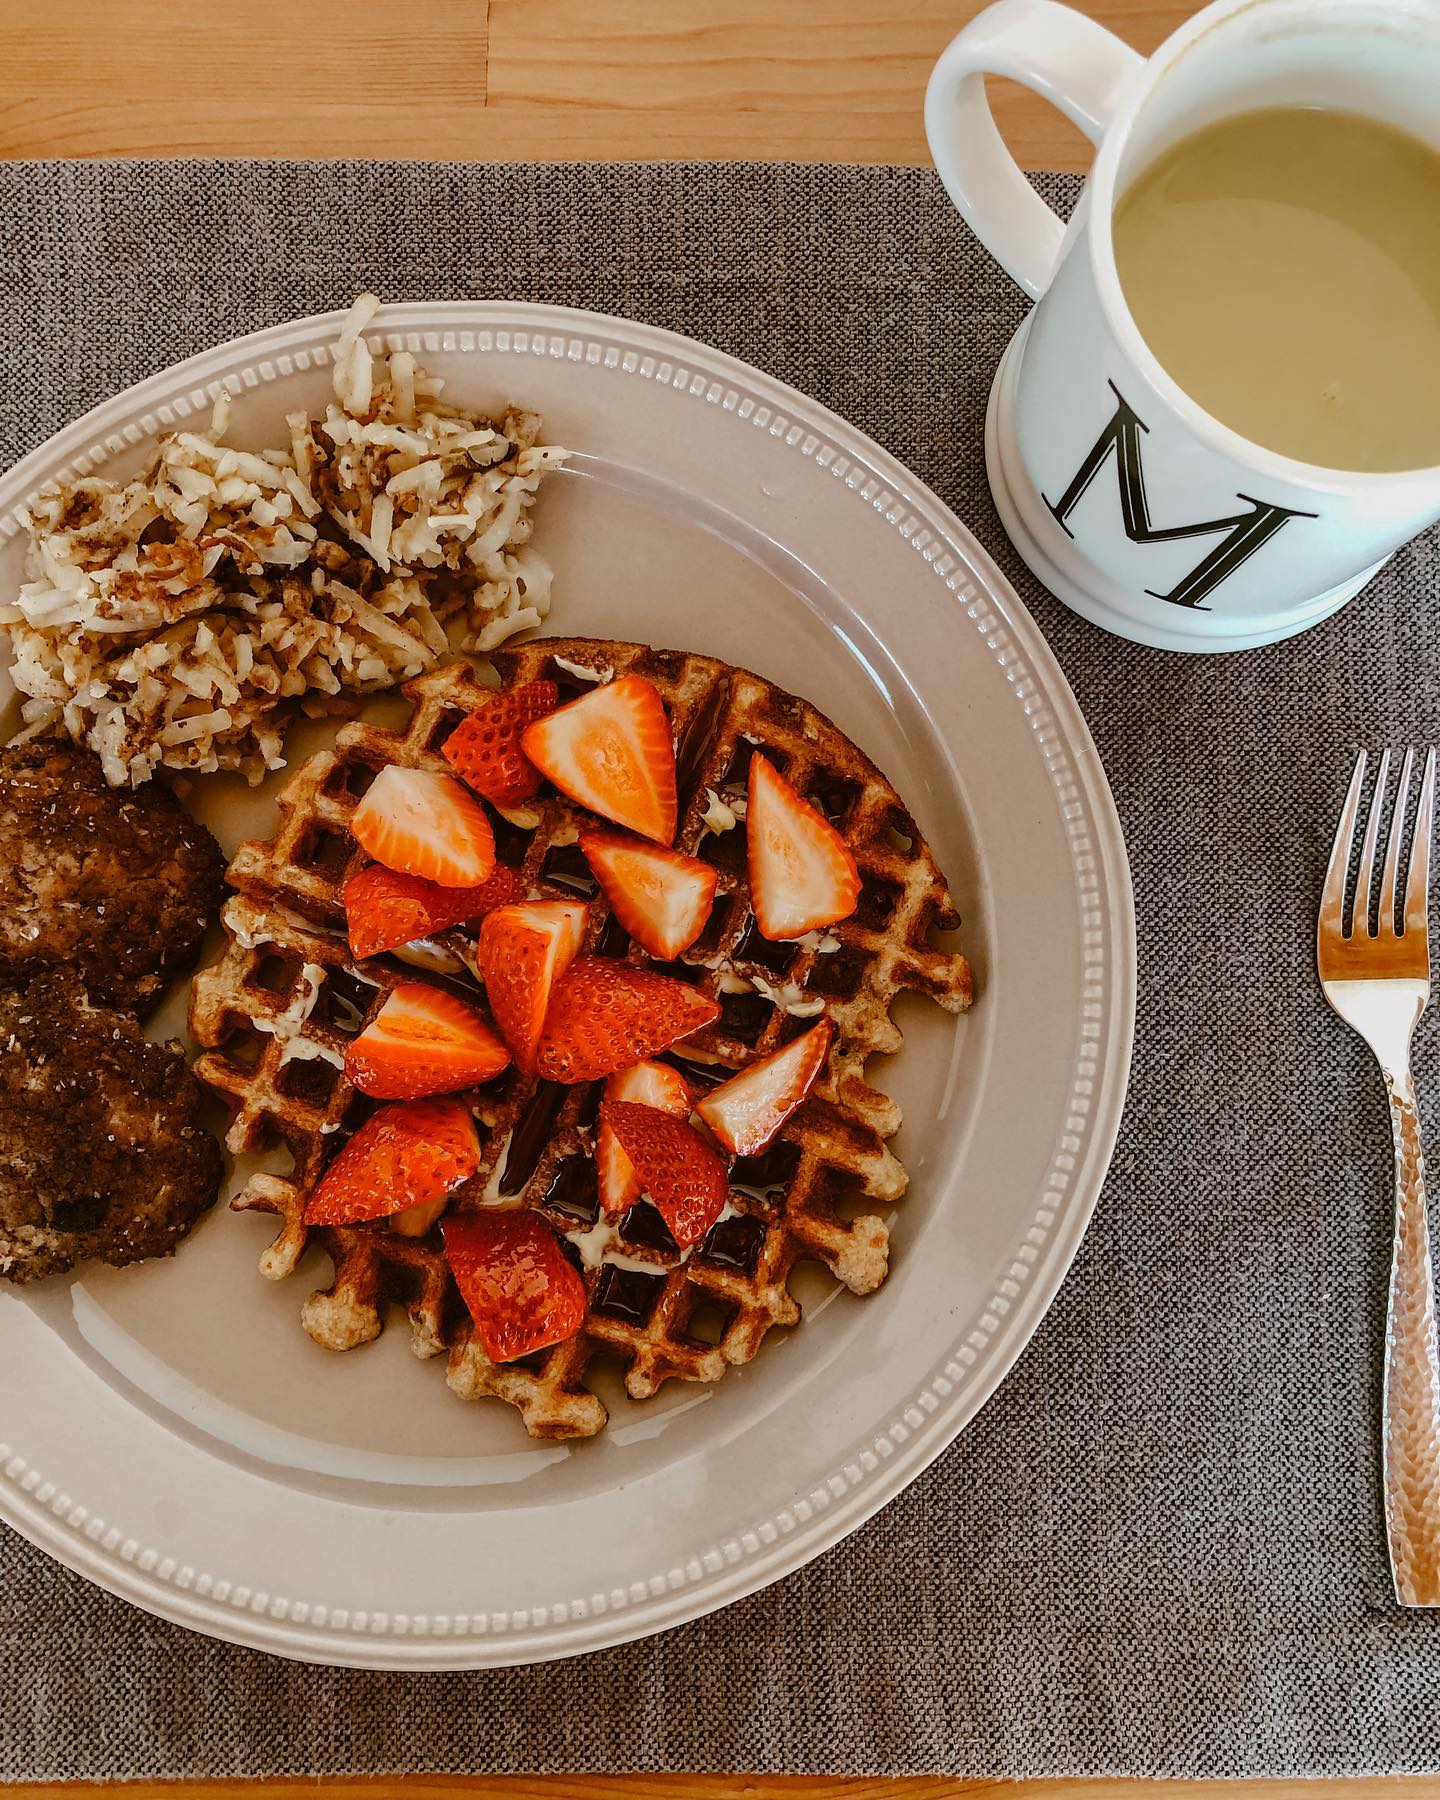 Saturday morning brunch. 💛

Homemade sausage, gf banana waffles, freah strawberries, hash browns and a matcha late. 🧇🍓🍵

It doesn’t happen as often as I’d like but I love when Abe and I get a slow morning to cook together, eat and hangout. 🥰